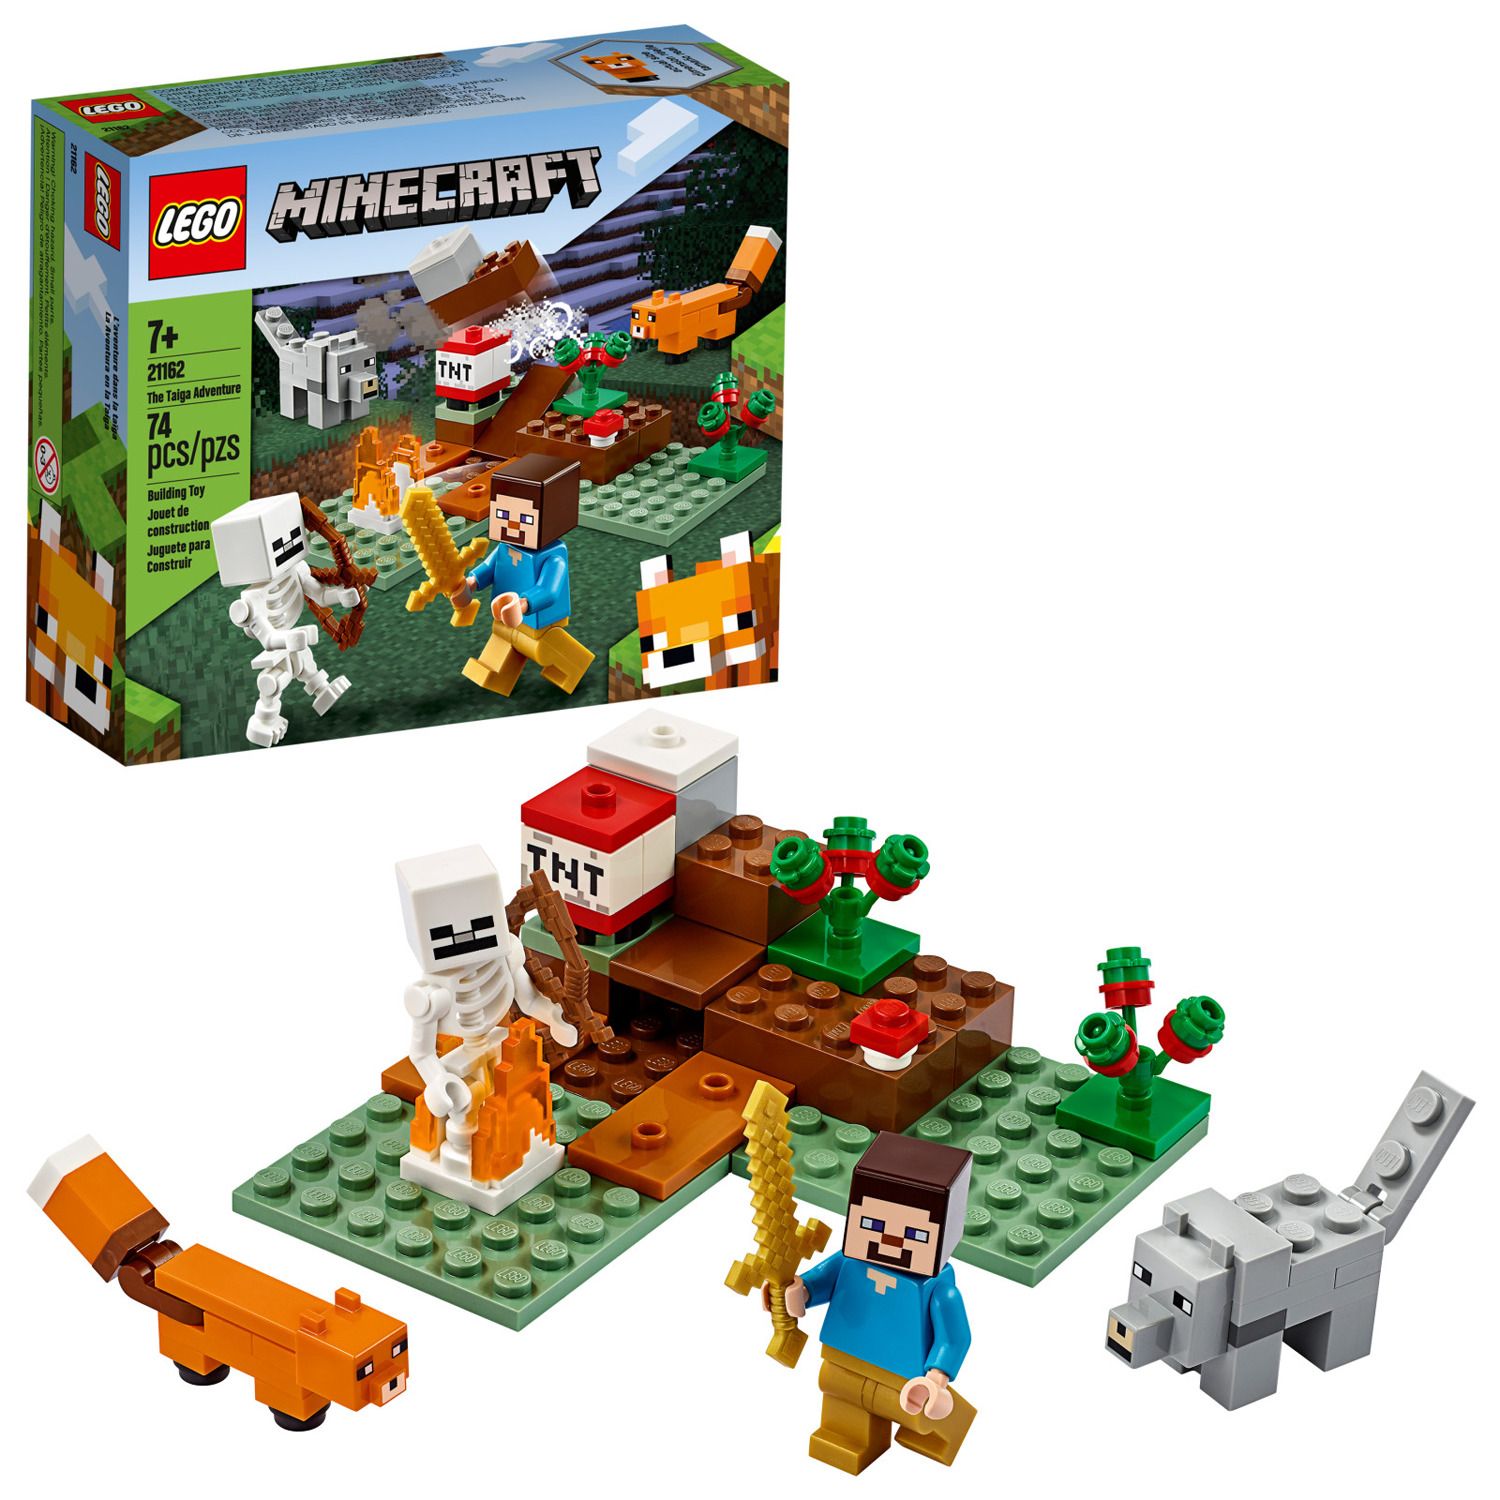 Image for LEGO Minecraft The Taiga Adventure 21162 Cool Set for Kids at Kohl's.